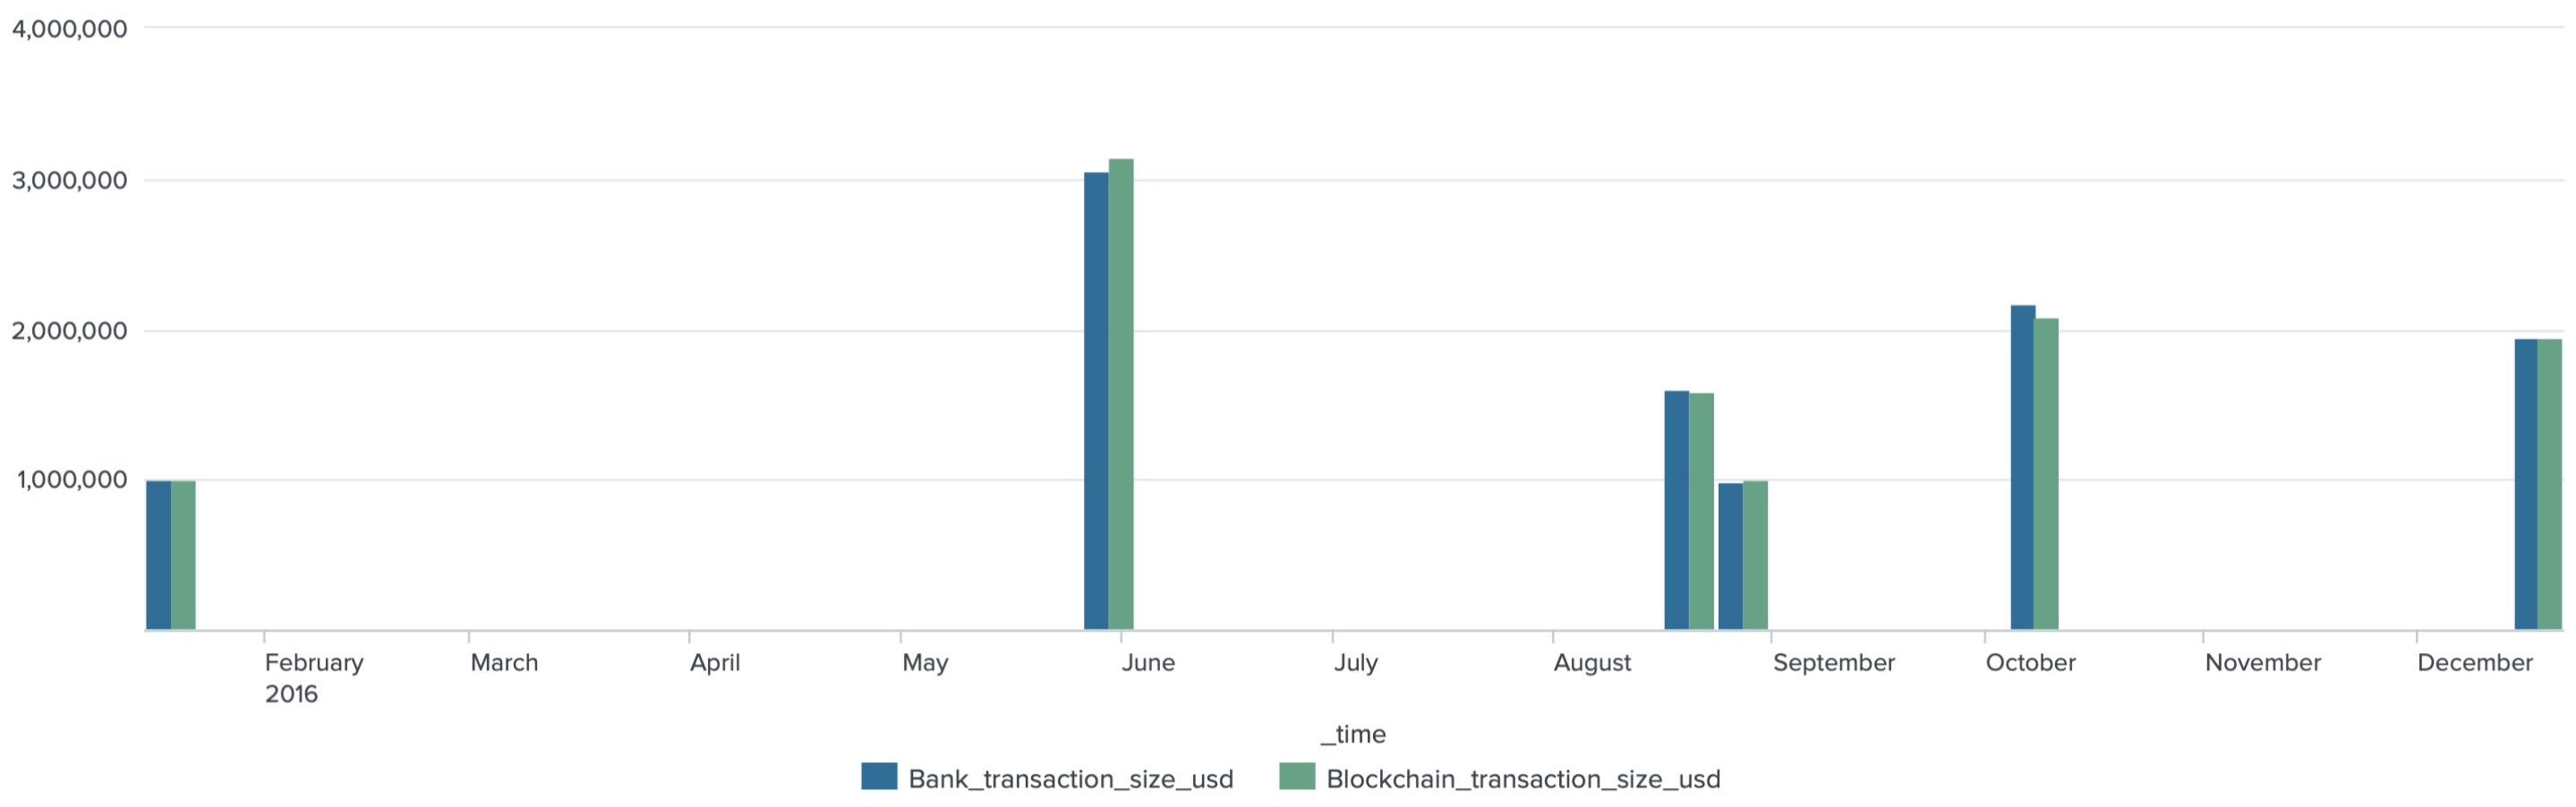 Blockchain and bank transaction volume (USD) streams overlapped in the common time period, Jan — Dec, 2016. Source: <a href="https://inca.digital/products#data">Inca Digital</a>